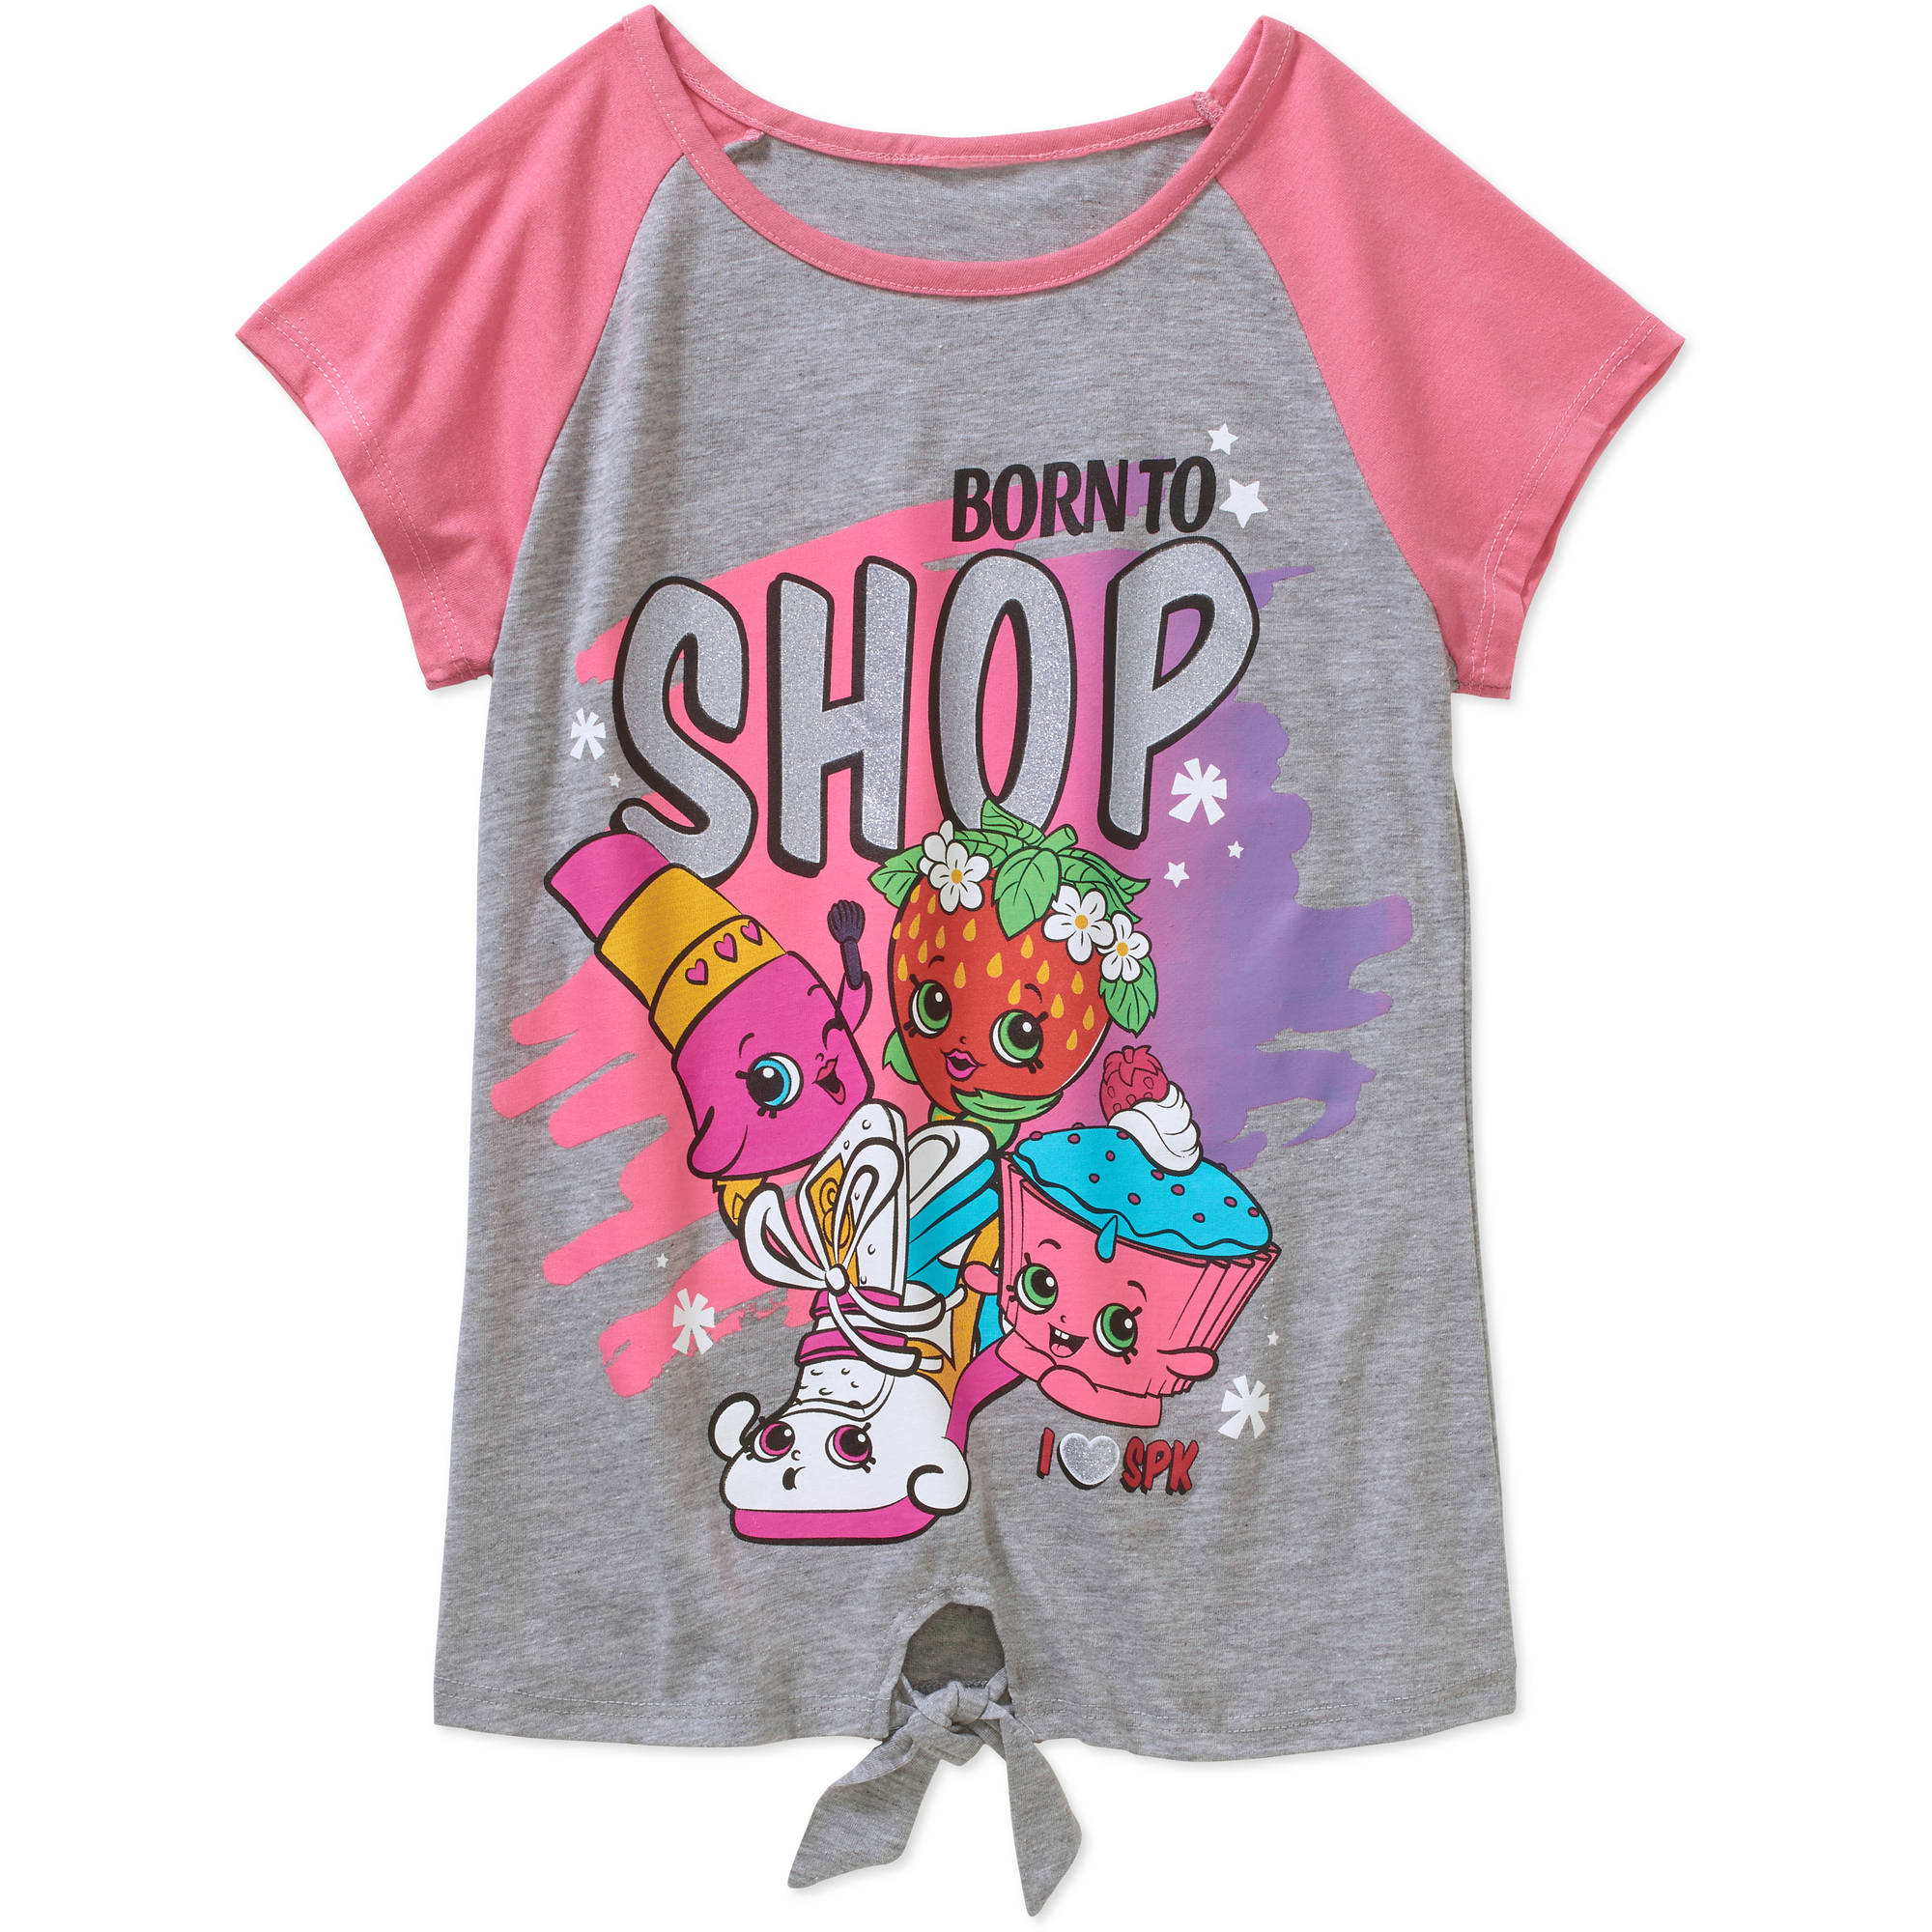 Girls' Born to Shop Front Tie Short Sleeve Crew Neck Graphic Tee - image 1 of 1